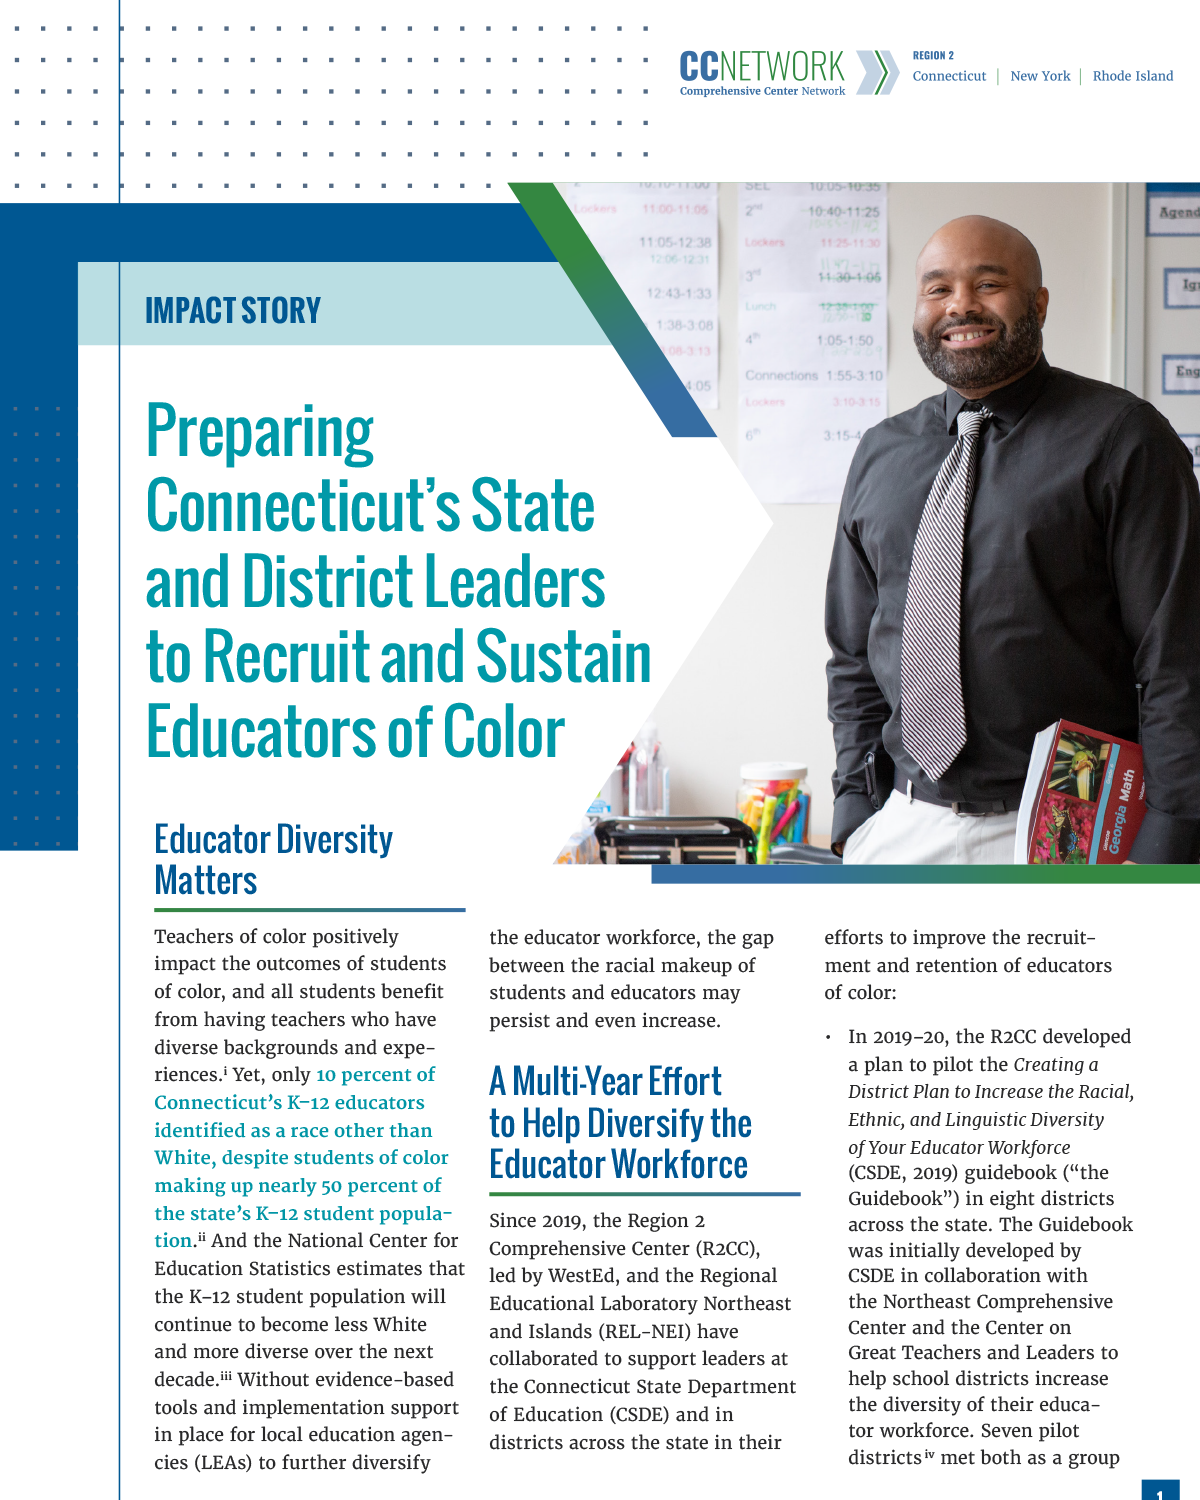 Preparing Connecticut's State and District Leaders to Recruit and Sustain Educators of Color